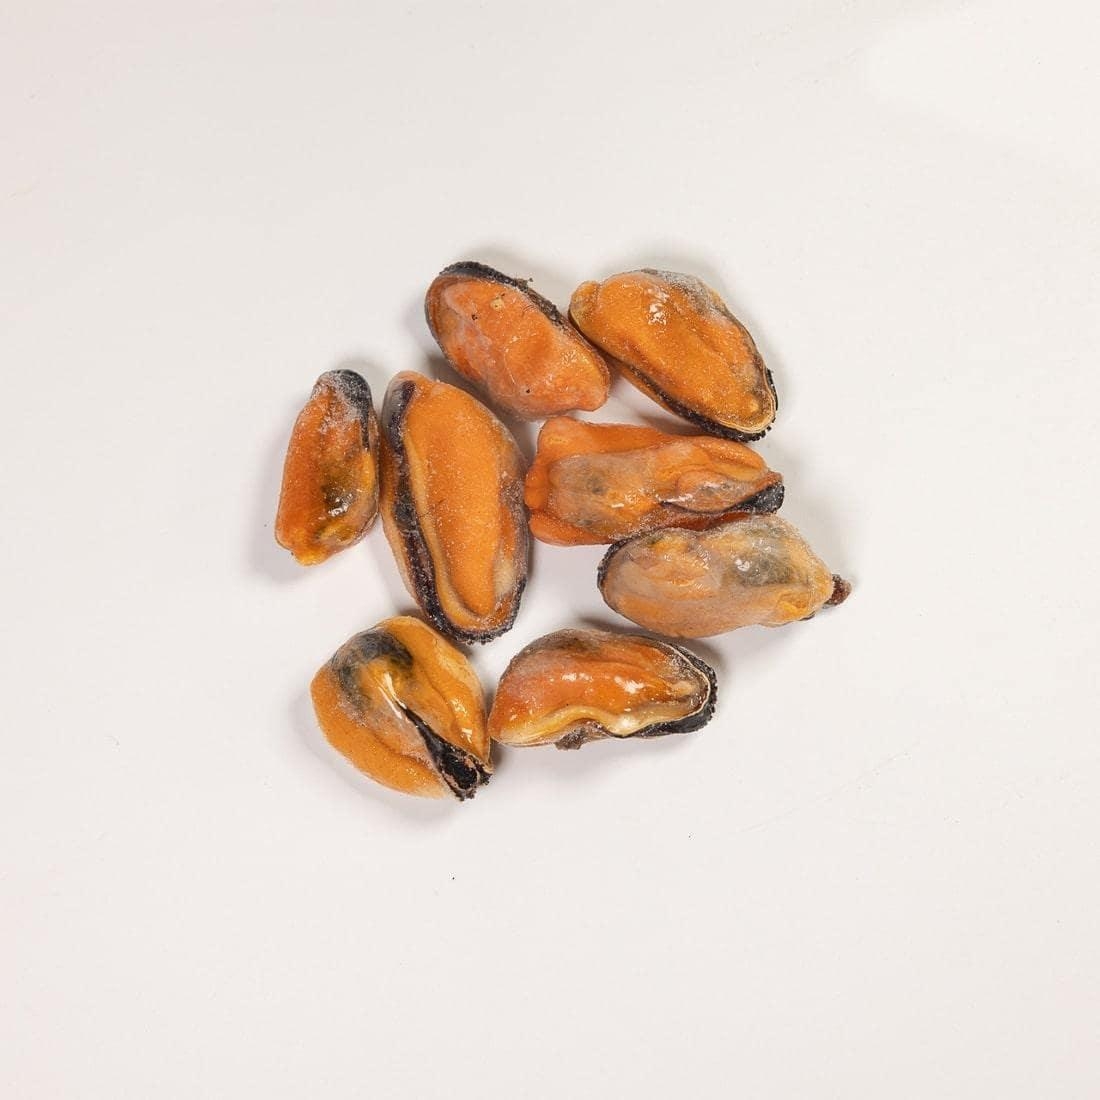 Image 0 of Shelled mussels